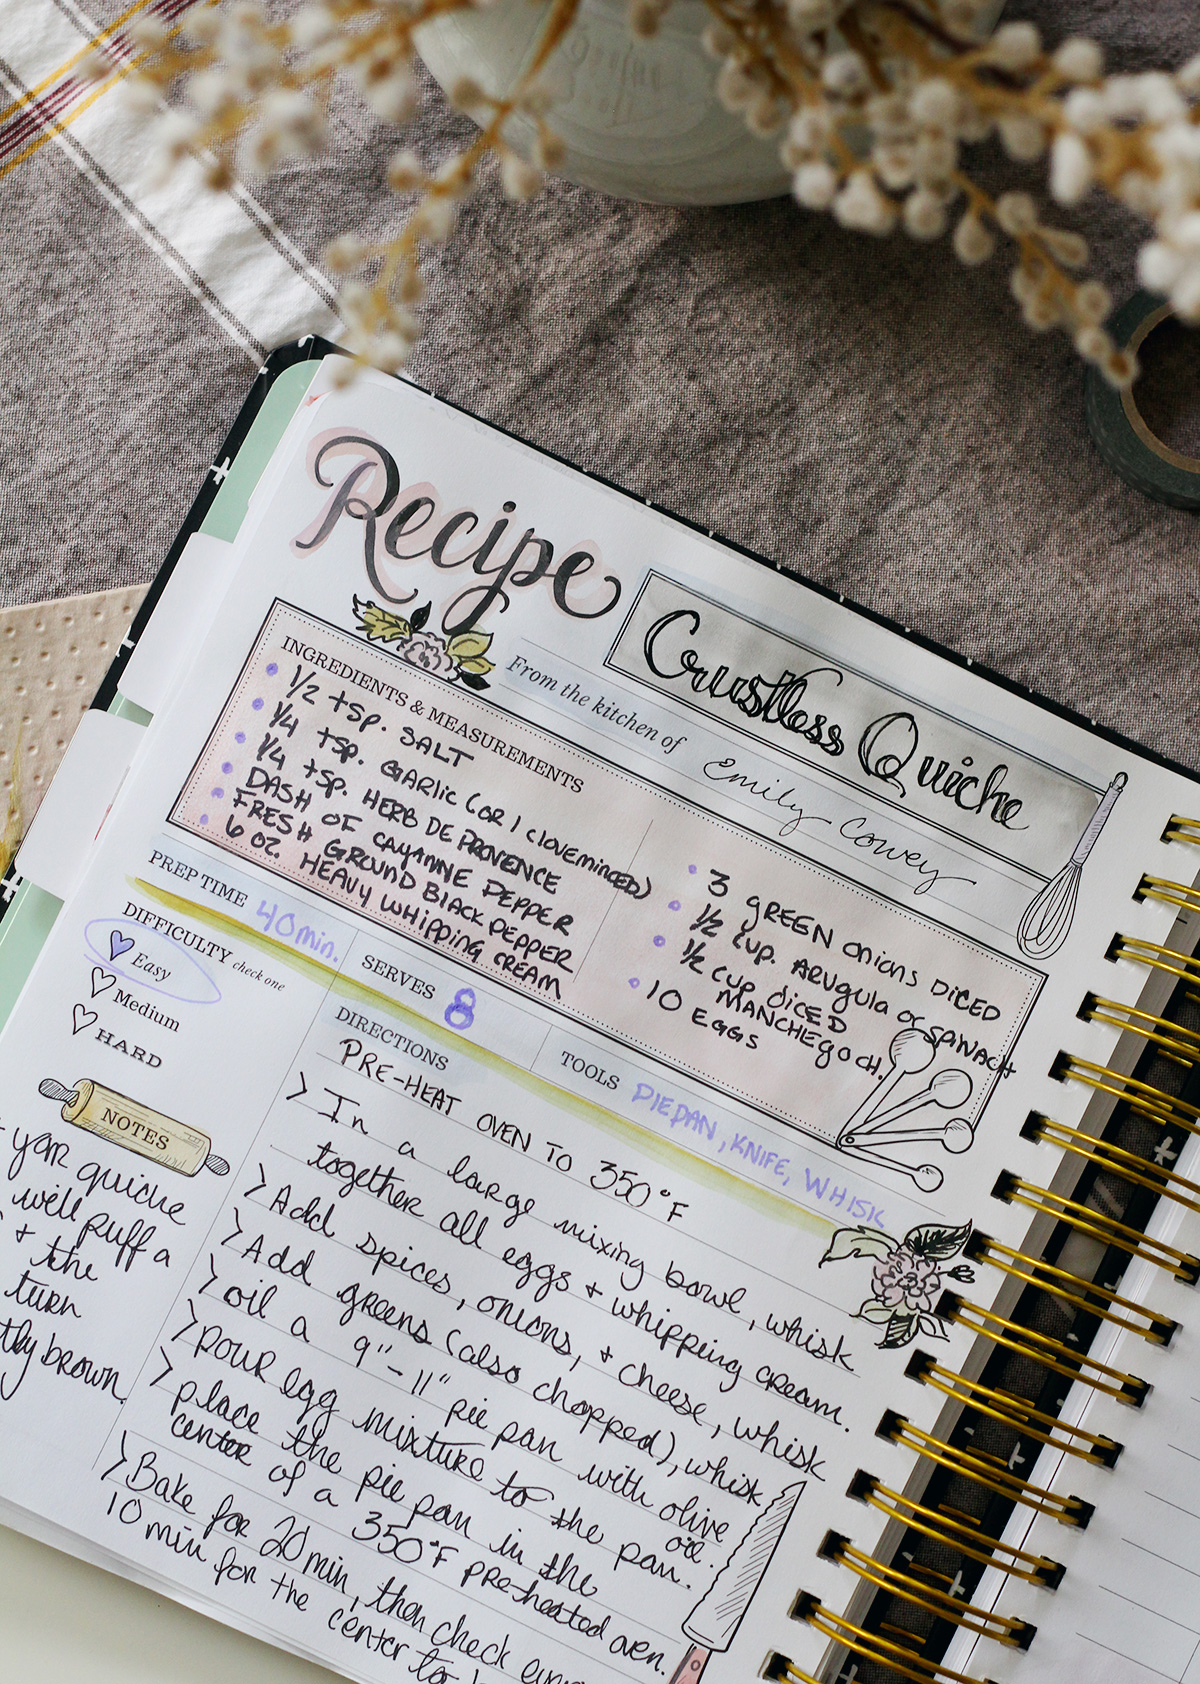 Handwrite your favorite recipes in the Keepsake Kitchen Diary! A cookbook + Memory keeping journal 